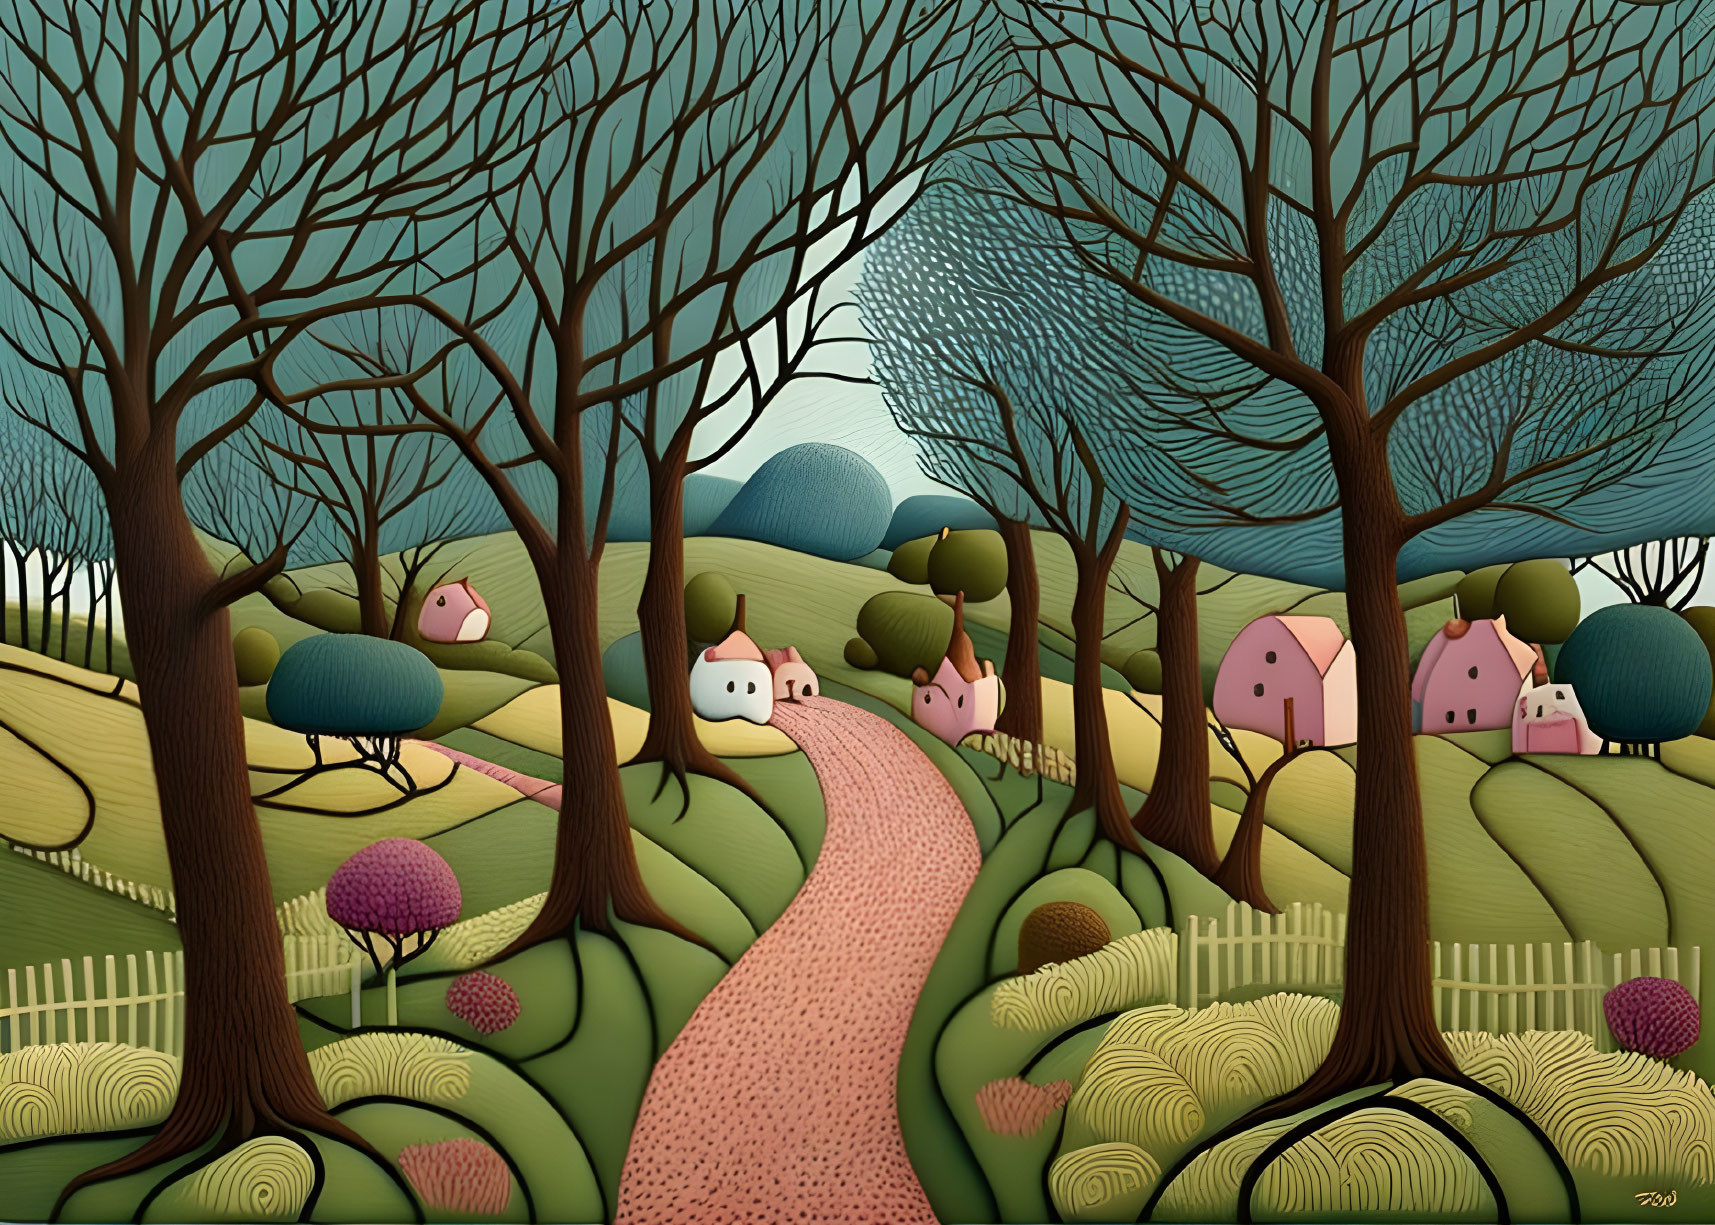 Whimsical countryside scene with stylized trees, winding path, rolling hills, and pastel-colored